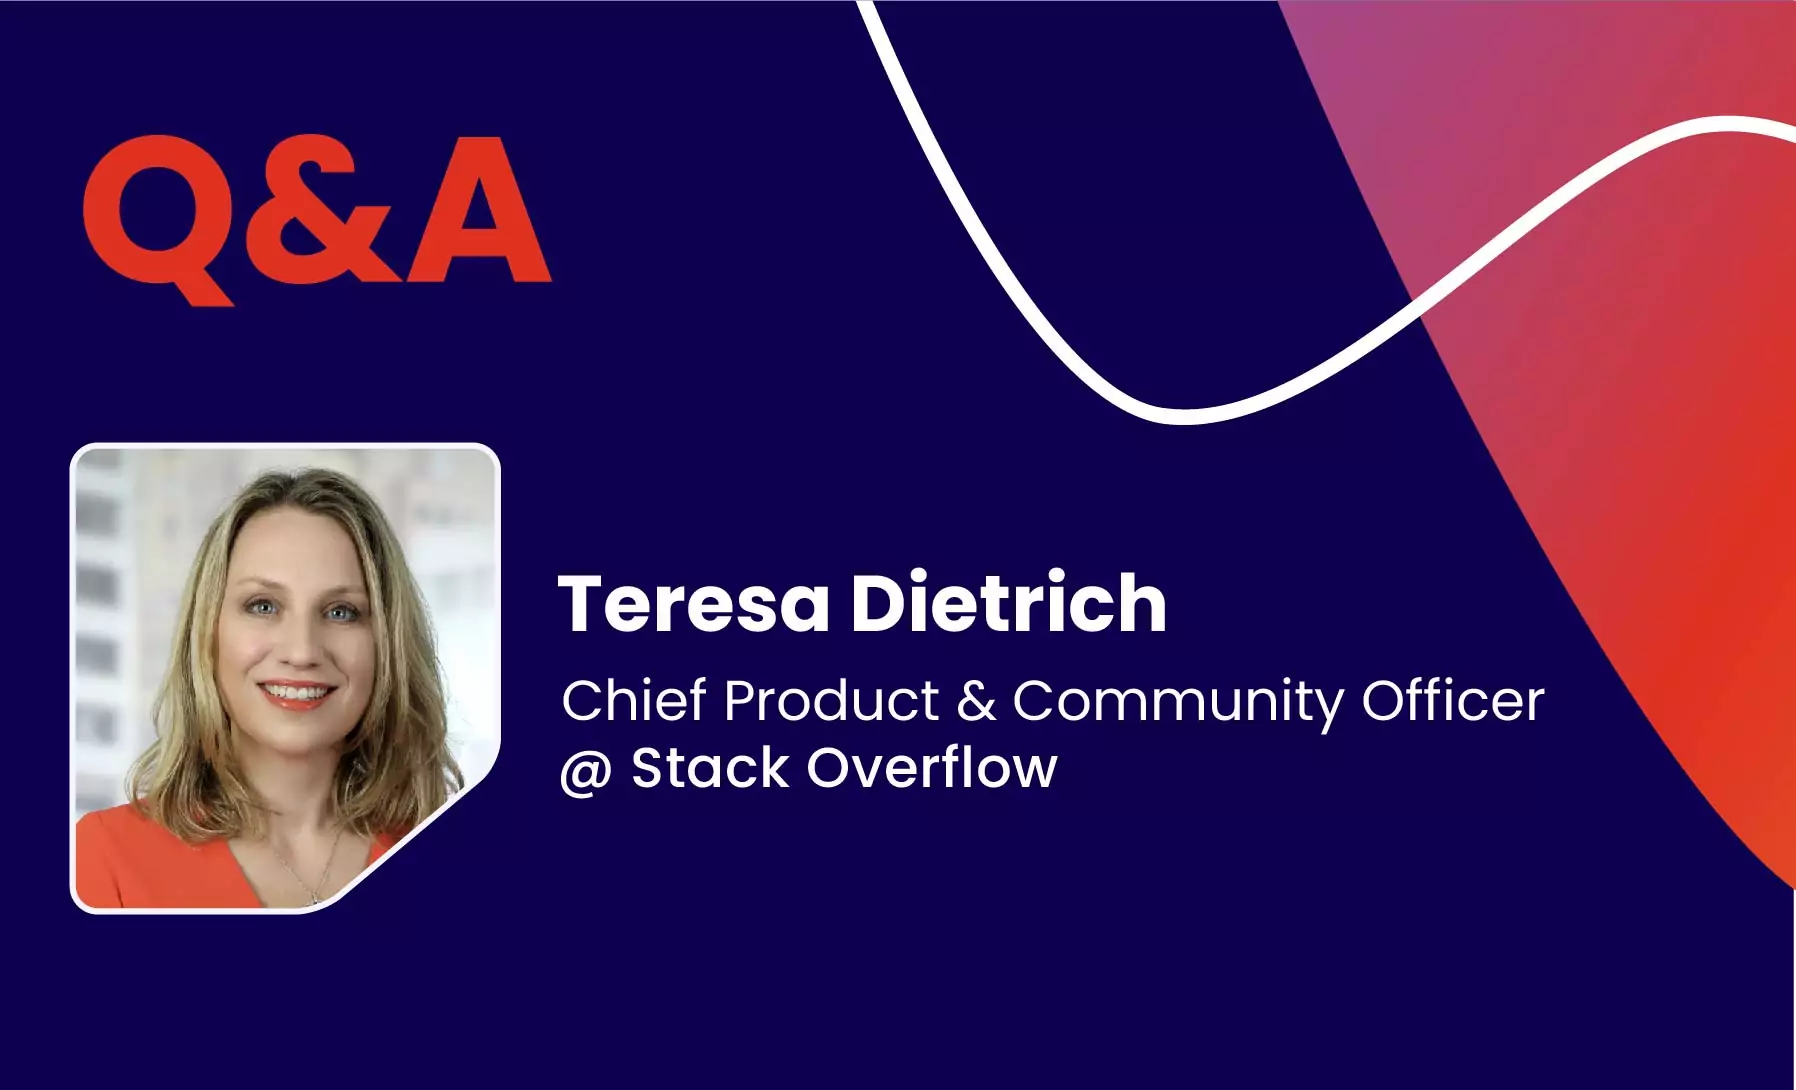 Q&A with Teresa Dietrich, Chief Product and Community Officer @ Stack Overflow